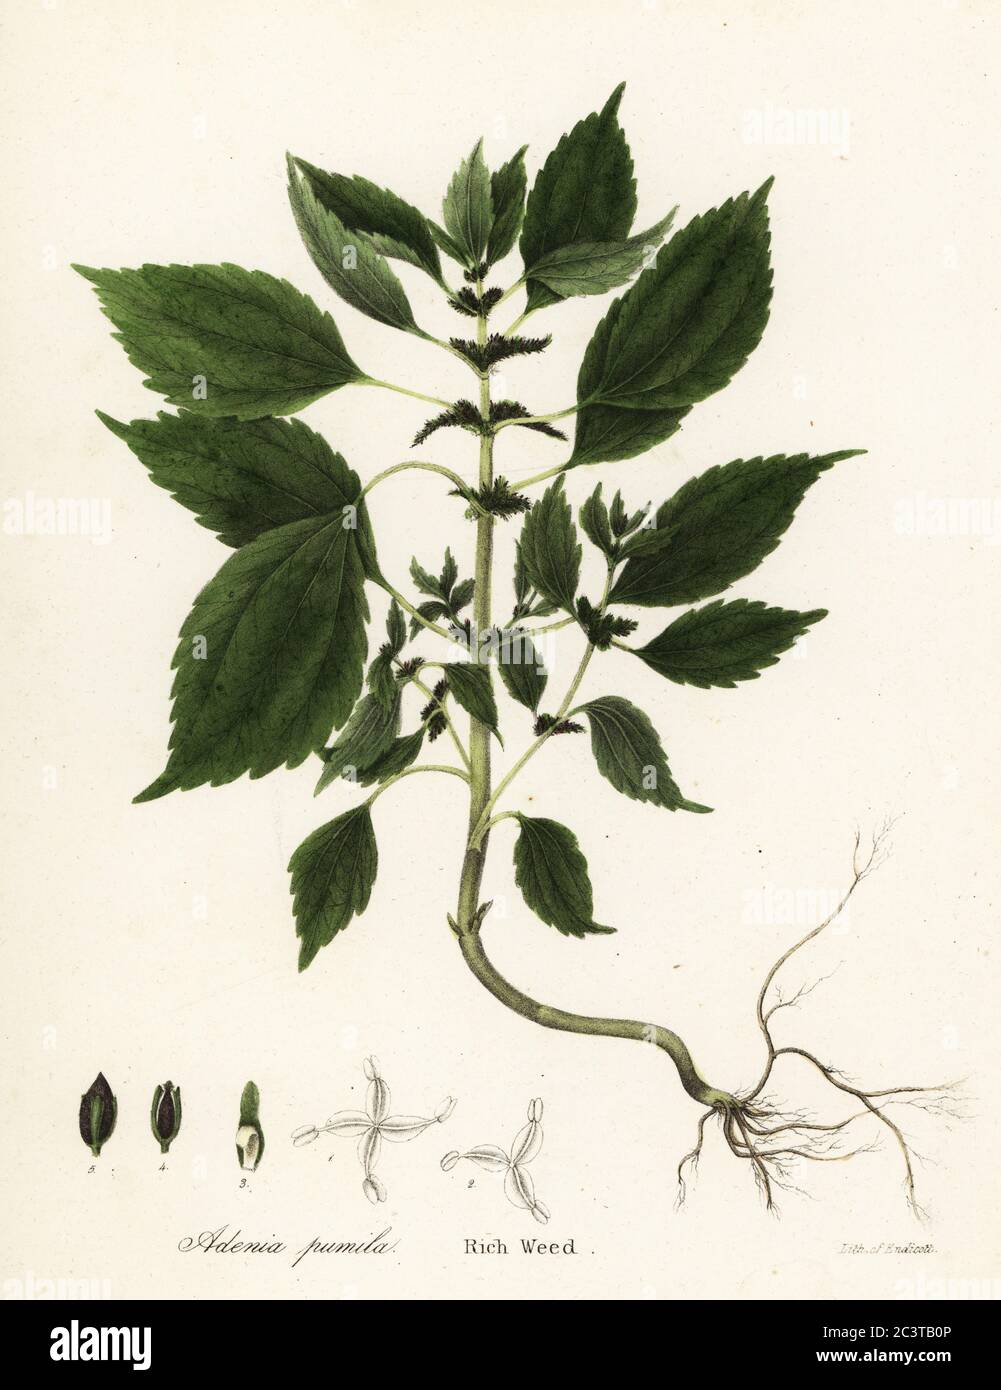 Rich weed, Adenia pumila (Collinsonia canadensis?). Handcoloured lithograph by Endicott after a botanical illustration from John Torrey’s A Flora of the State of New York, Carroll and Cook, Albany, 1843. The plates drawn by John Torrey, Agnes Mitchell, Elizabeth Paoley and Swinton. John Torrey was an American botanist, chemist and physician 1796-1873. Stock Photo